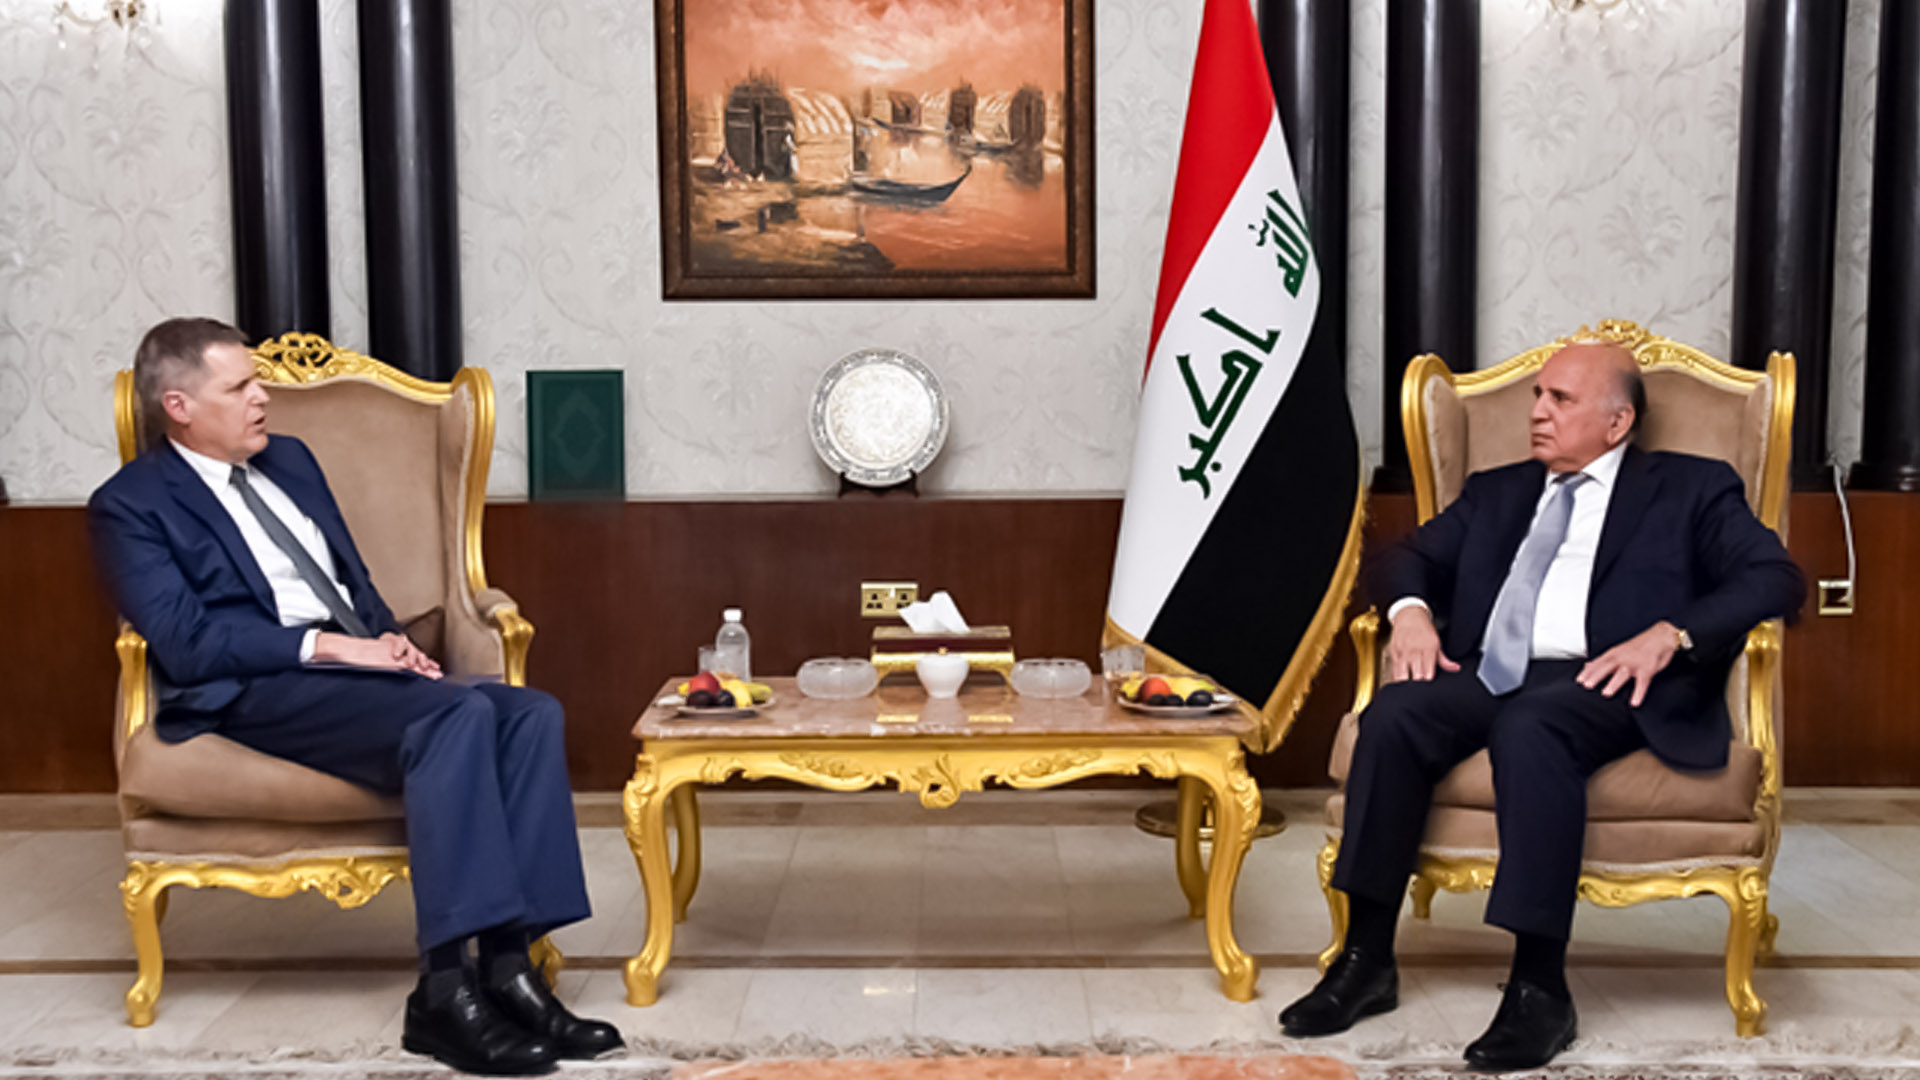 Iraqi Foreign Minister and US Ambassador discuss human rights